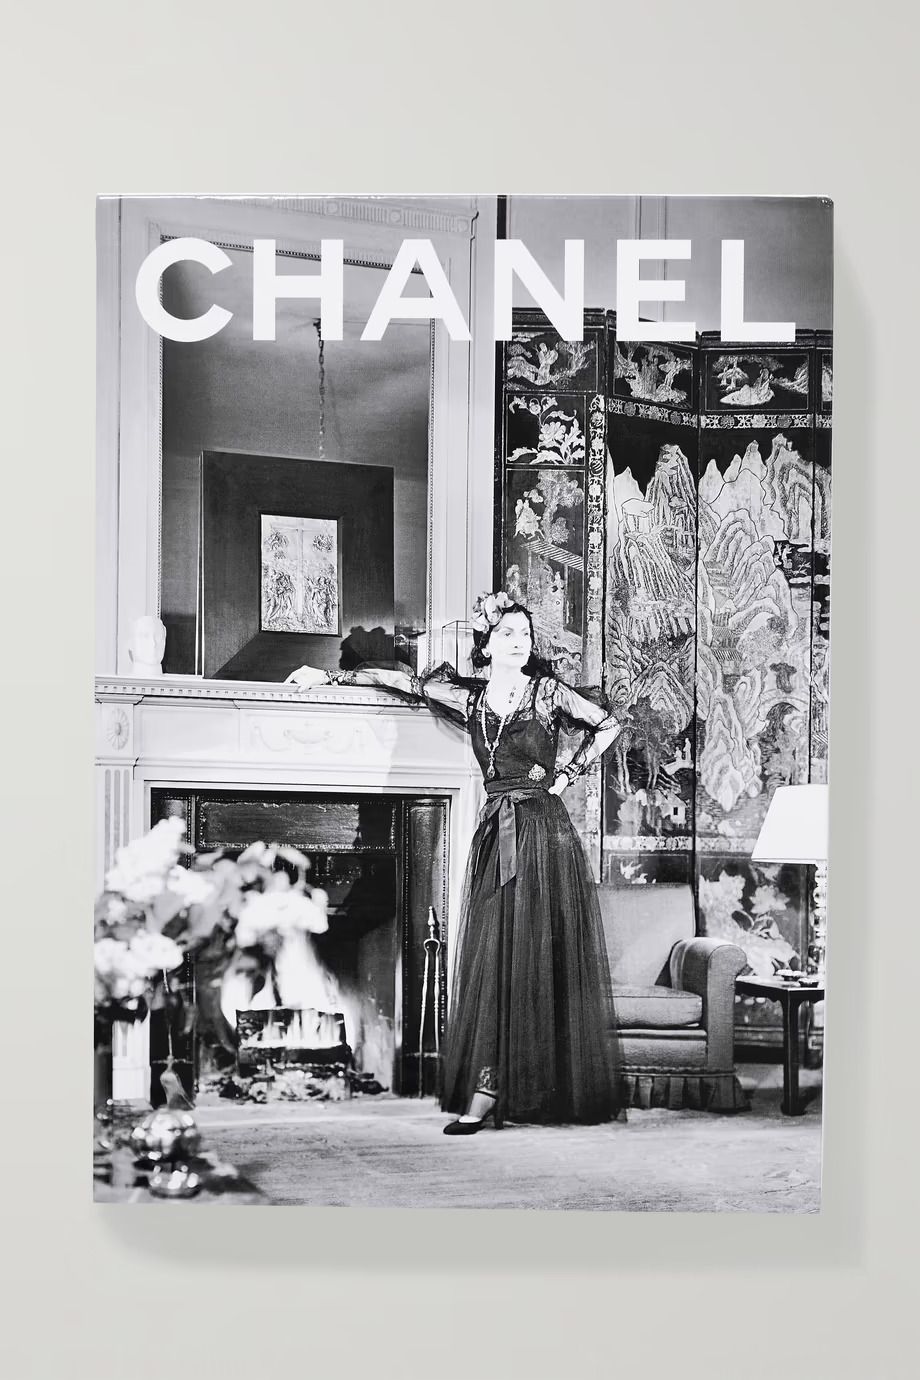 8 Fashion Books to Add to Your Collection - Coffee Table Books